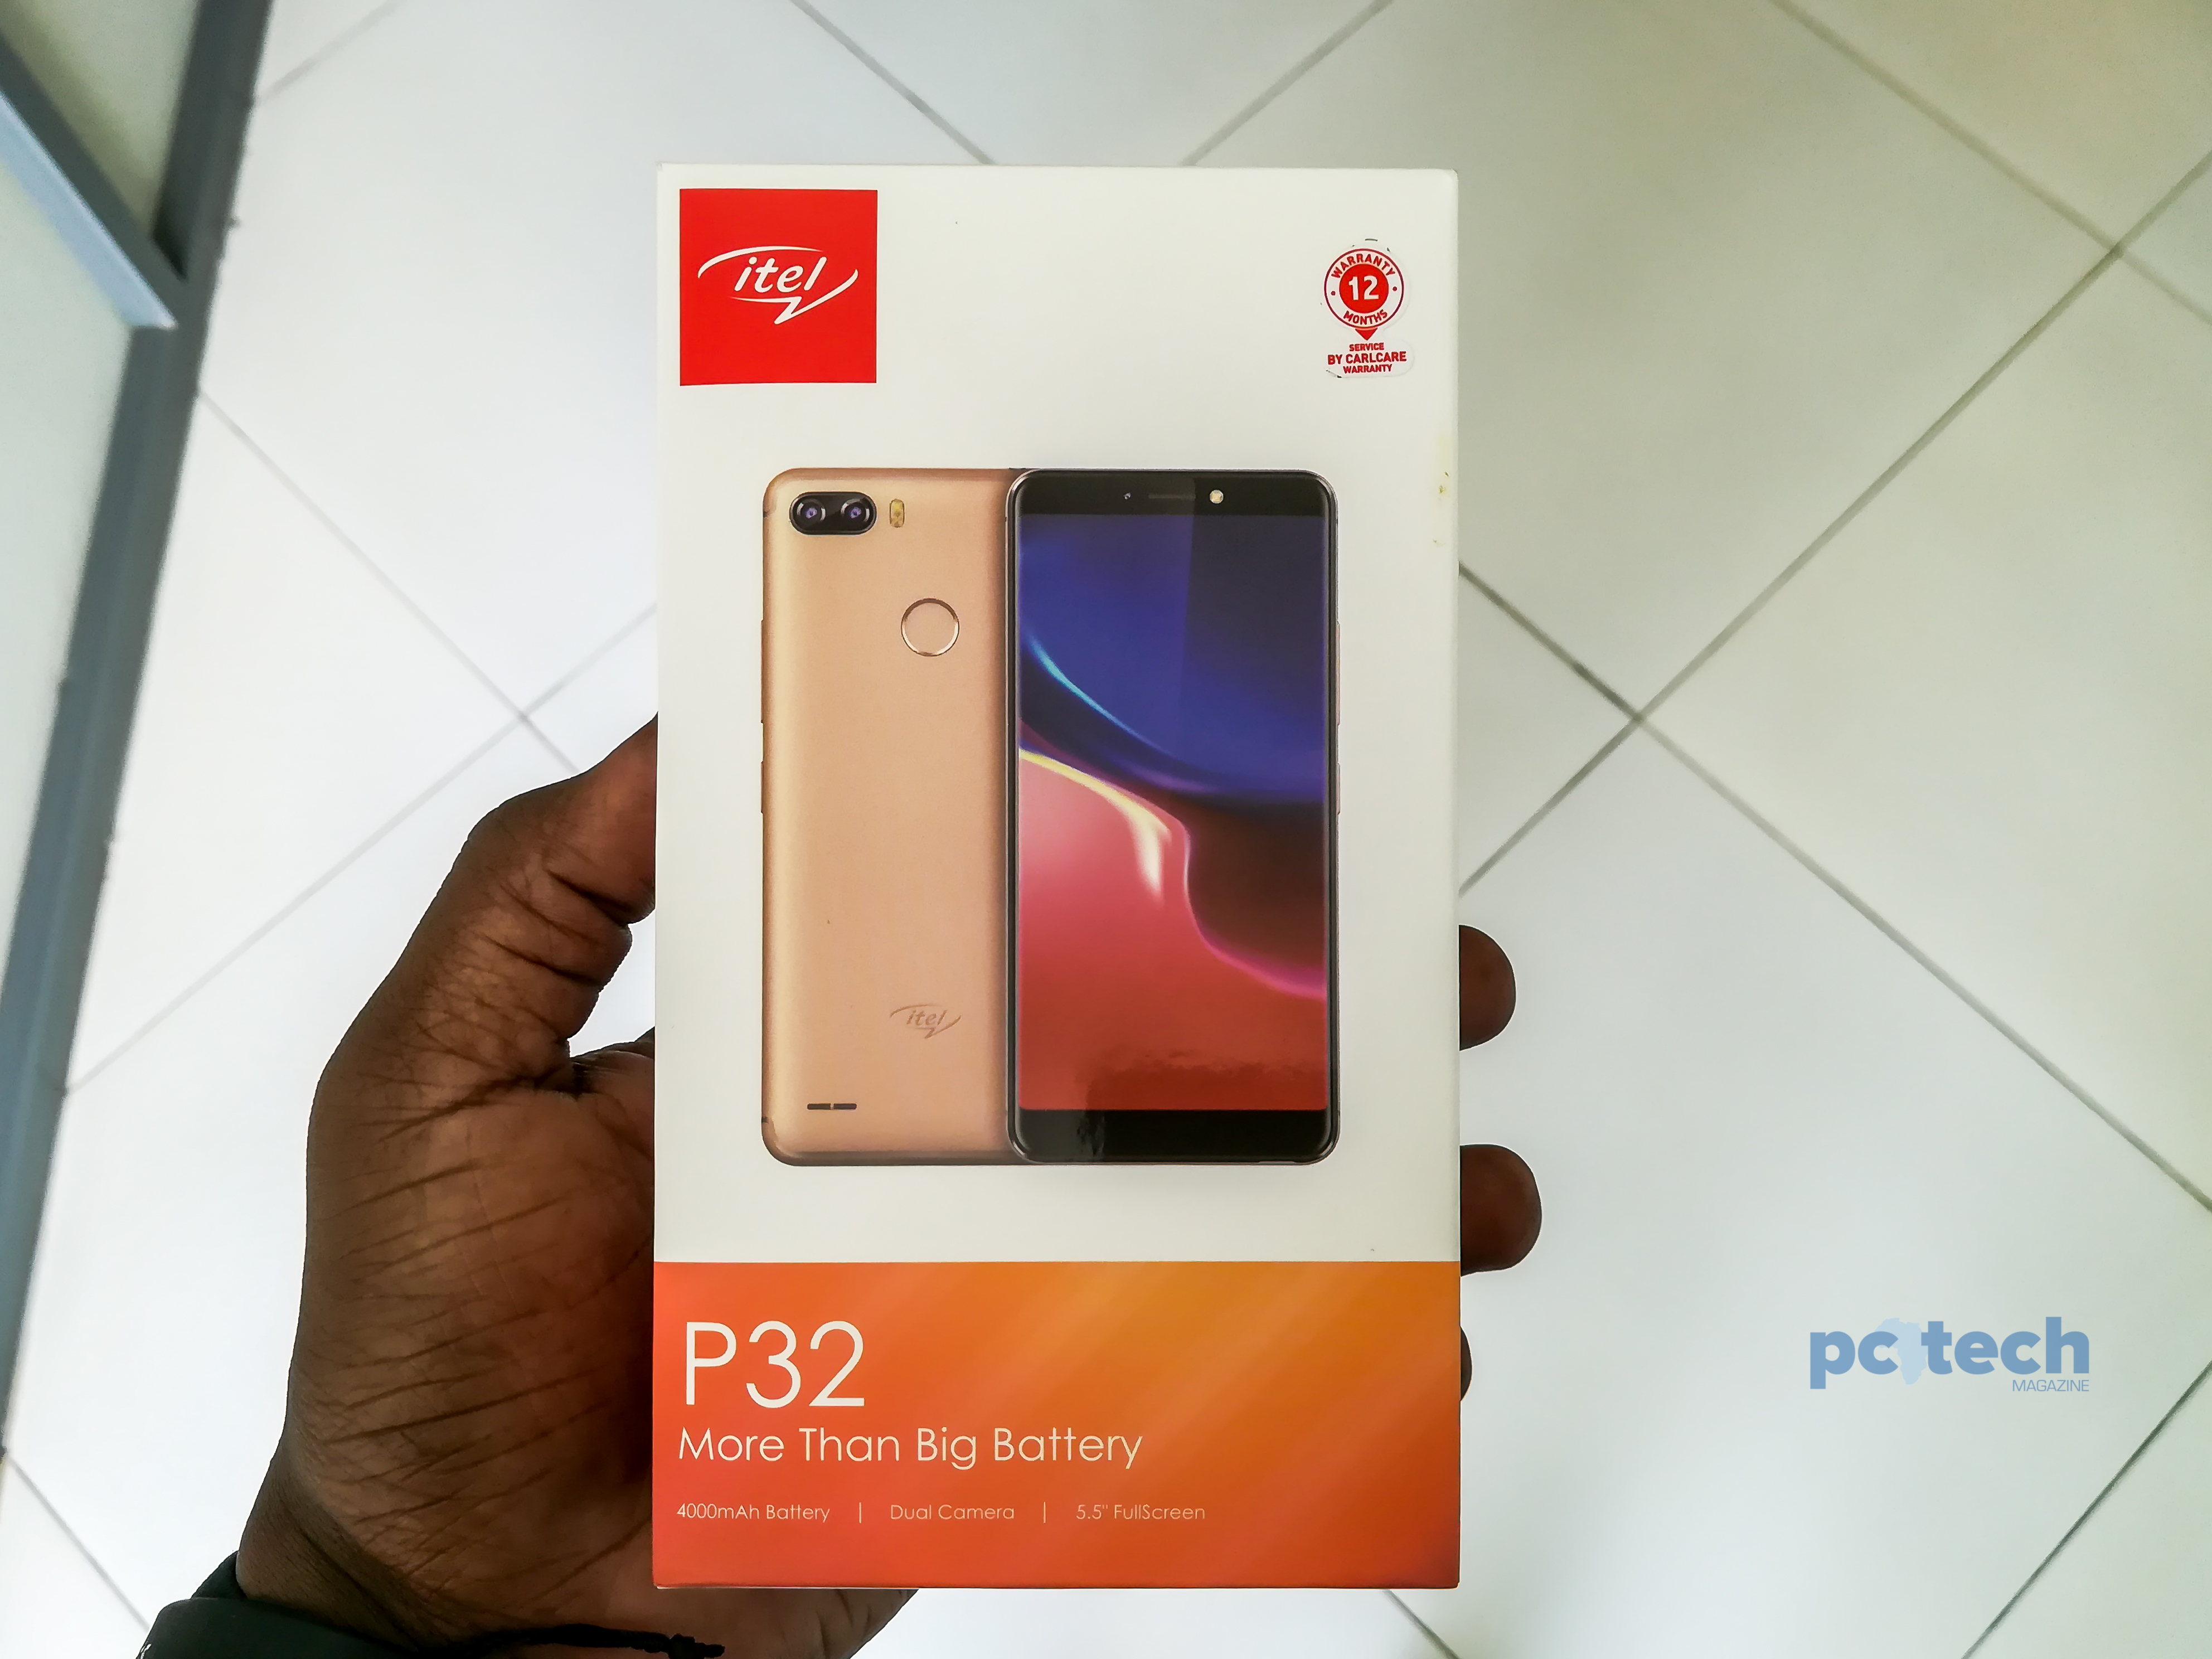 The itel P32 comes 4,000mAh battery and a dual rear camera setting as the key selling points. Priced between UGX330,000 to UGX350,000.